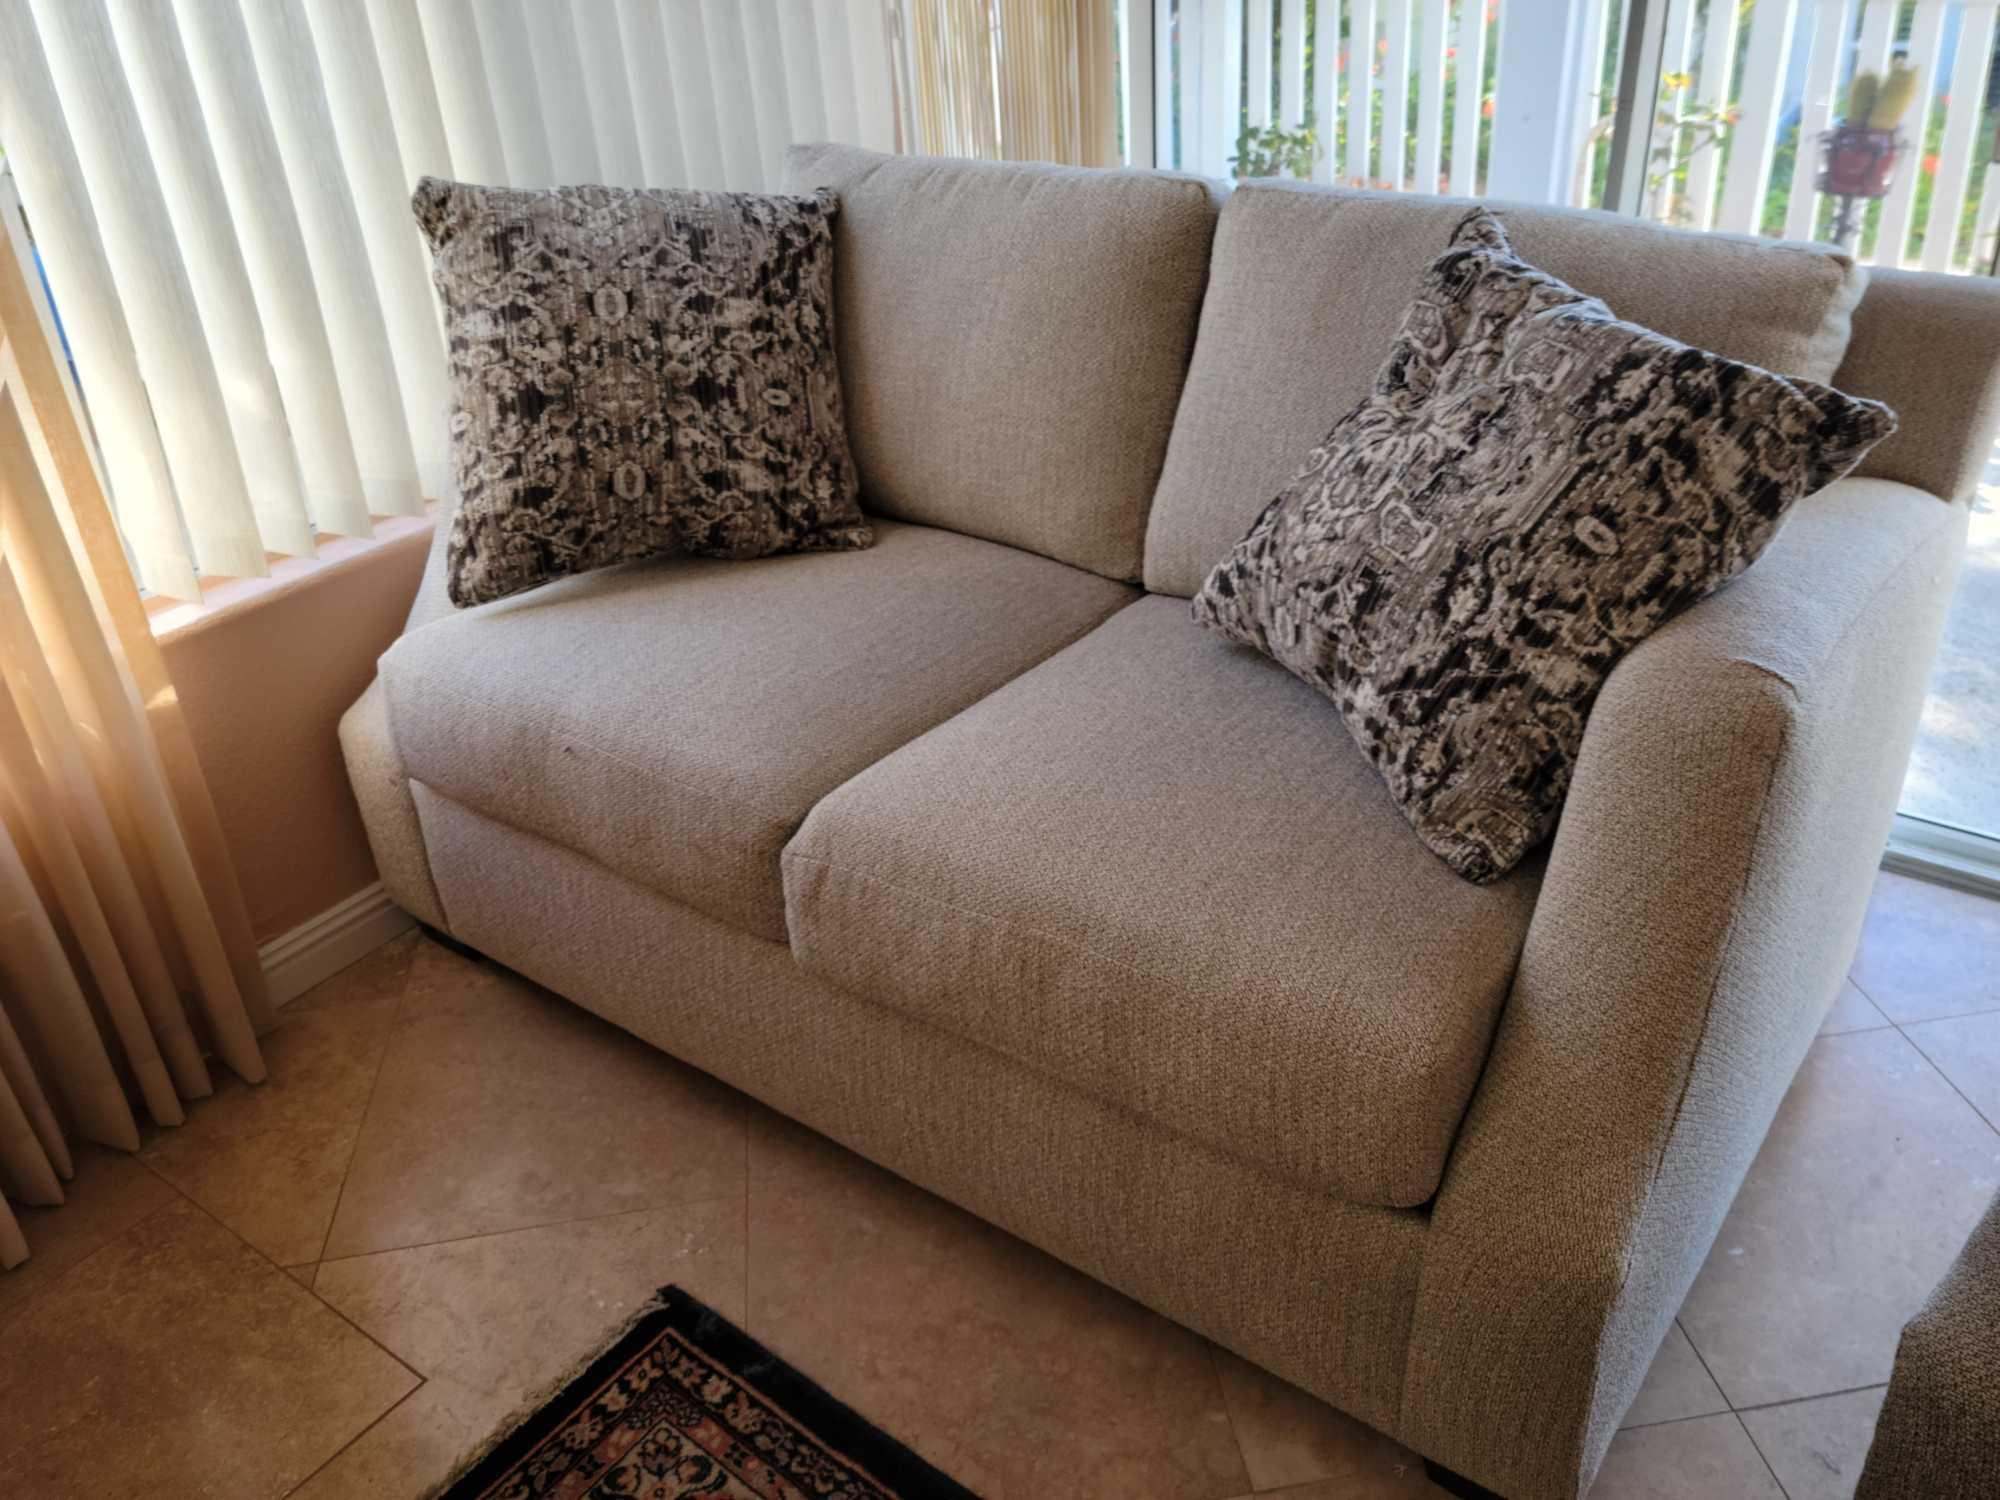 Loveseat and Matching chair